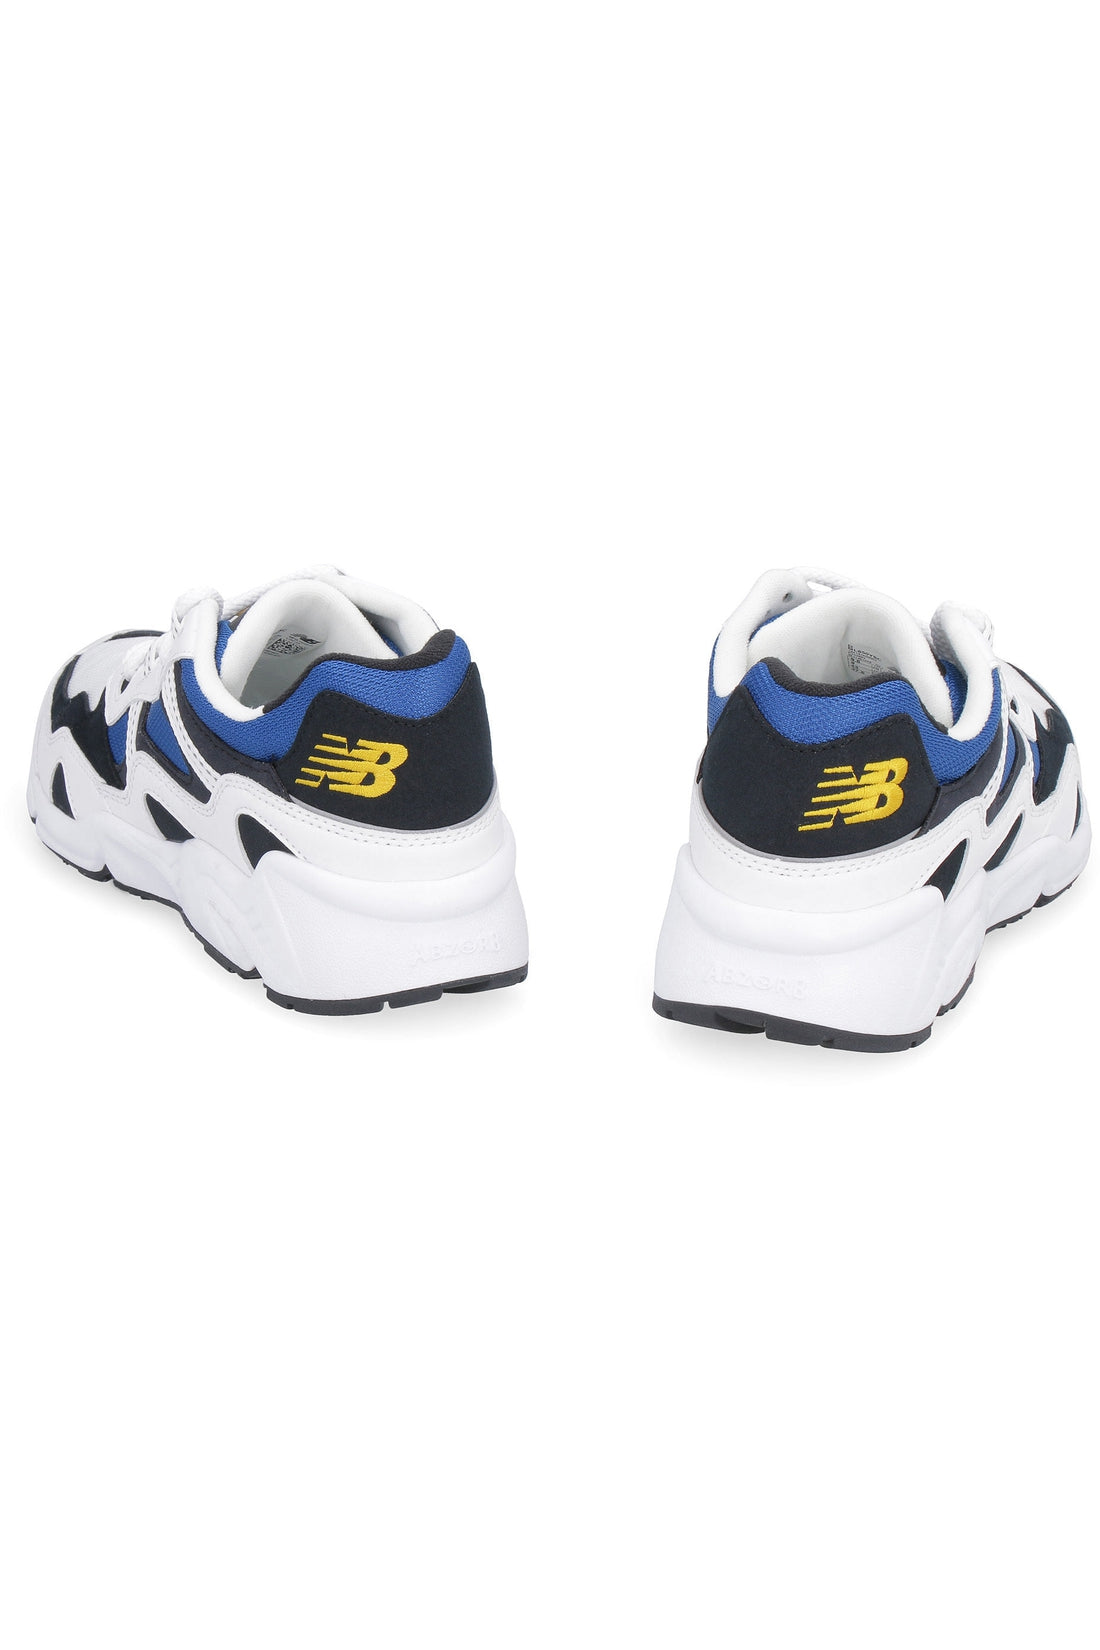 New Balance-OUTLET-SALE-Leather and fabric low-top sneakers-ARCHIVIST